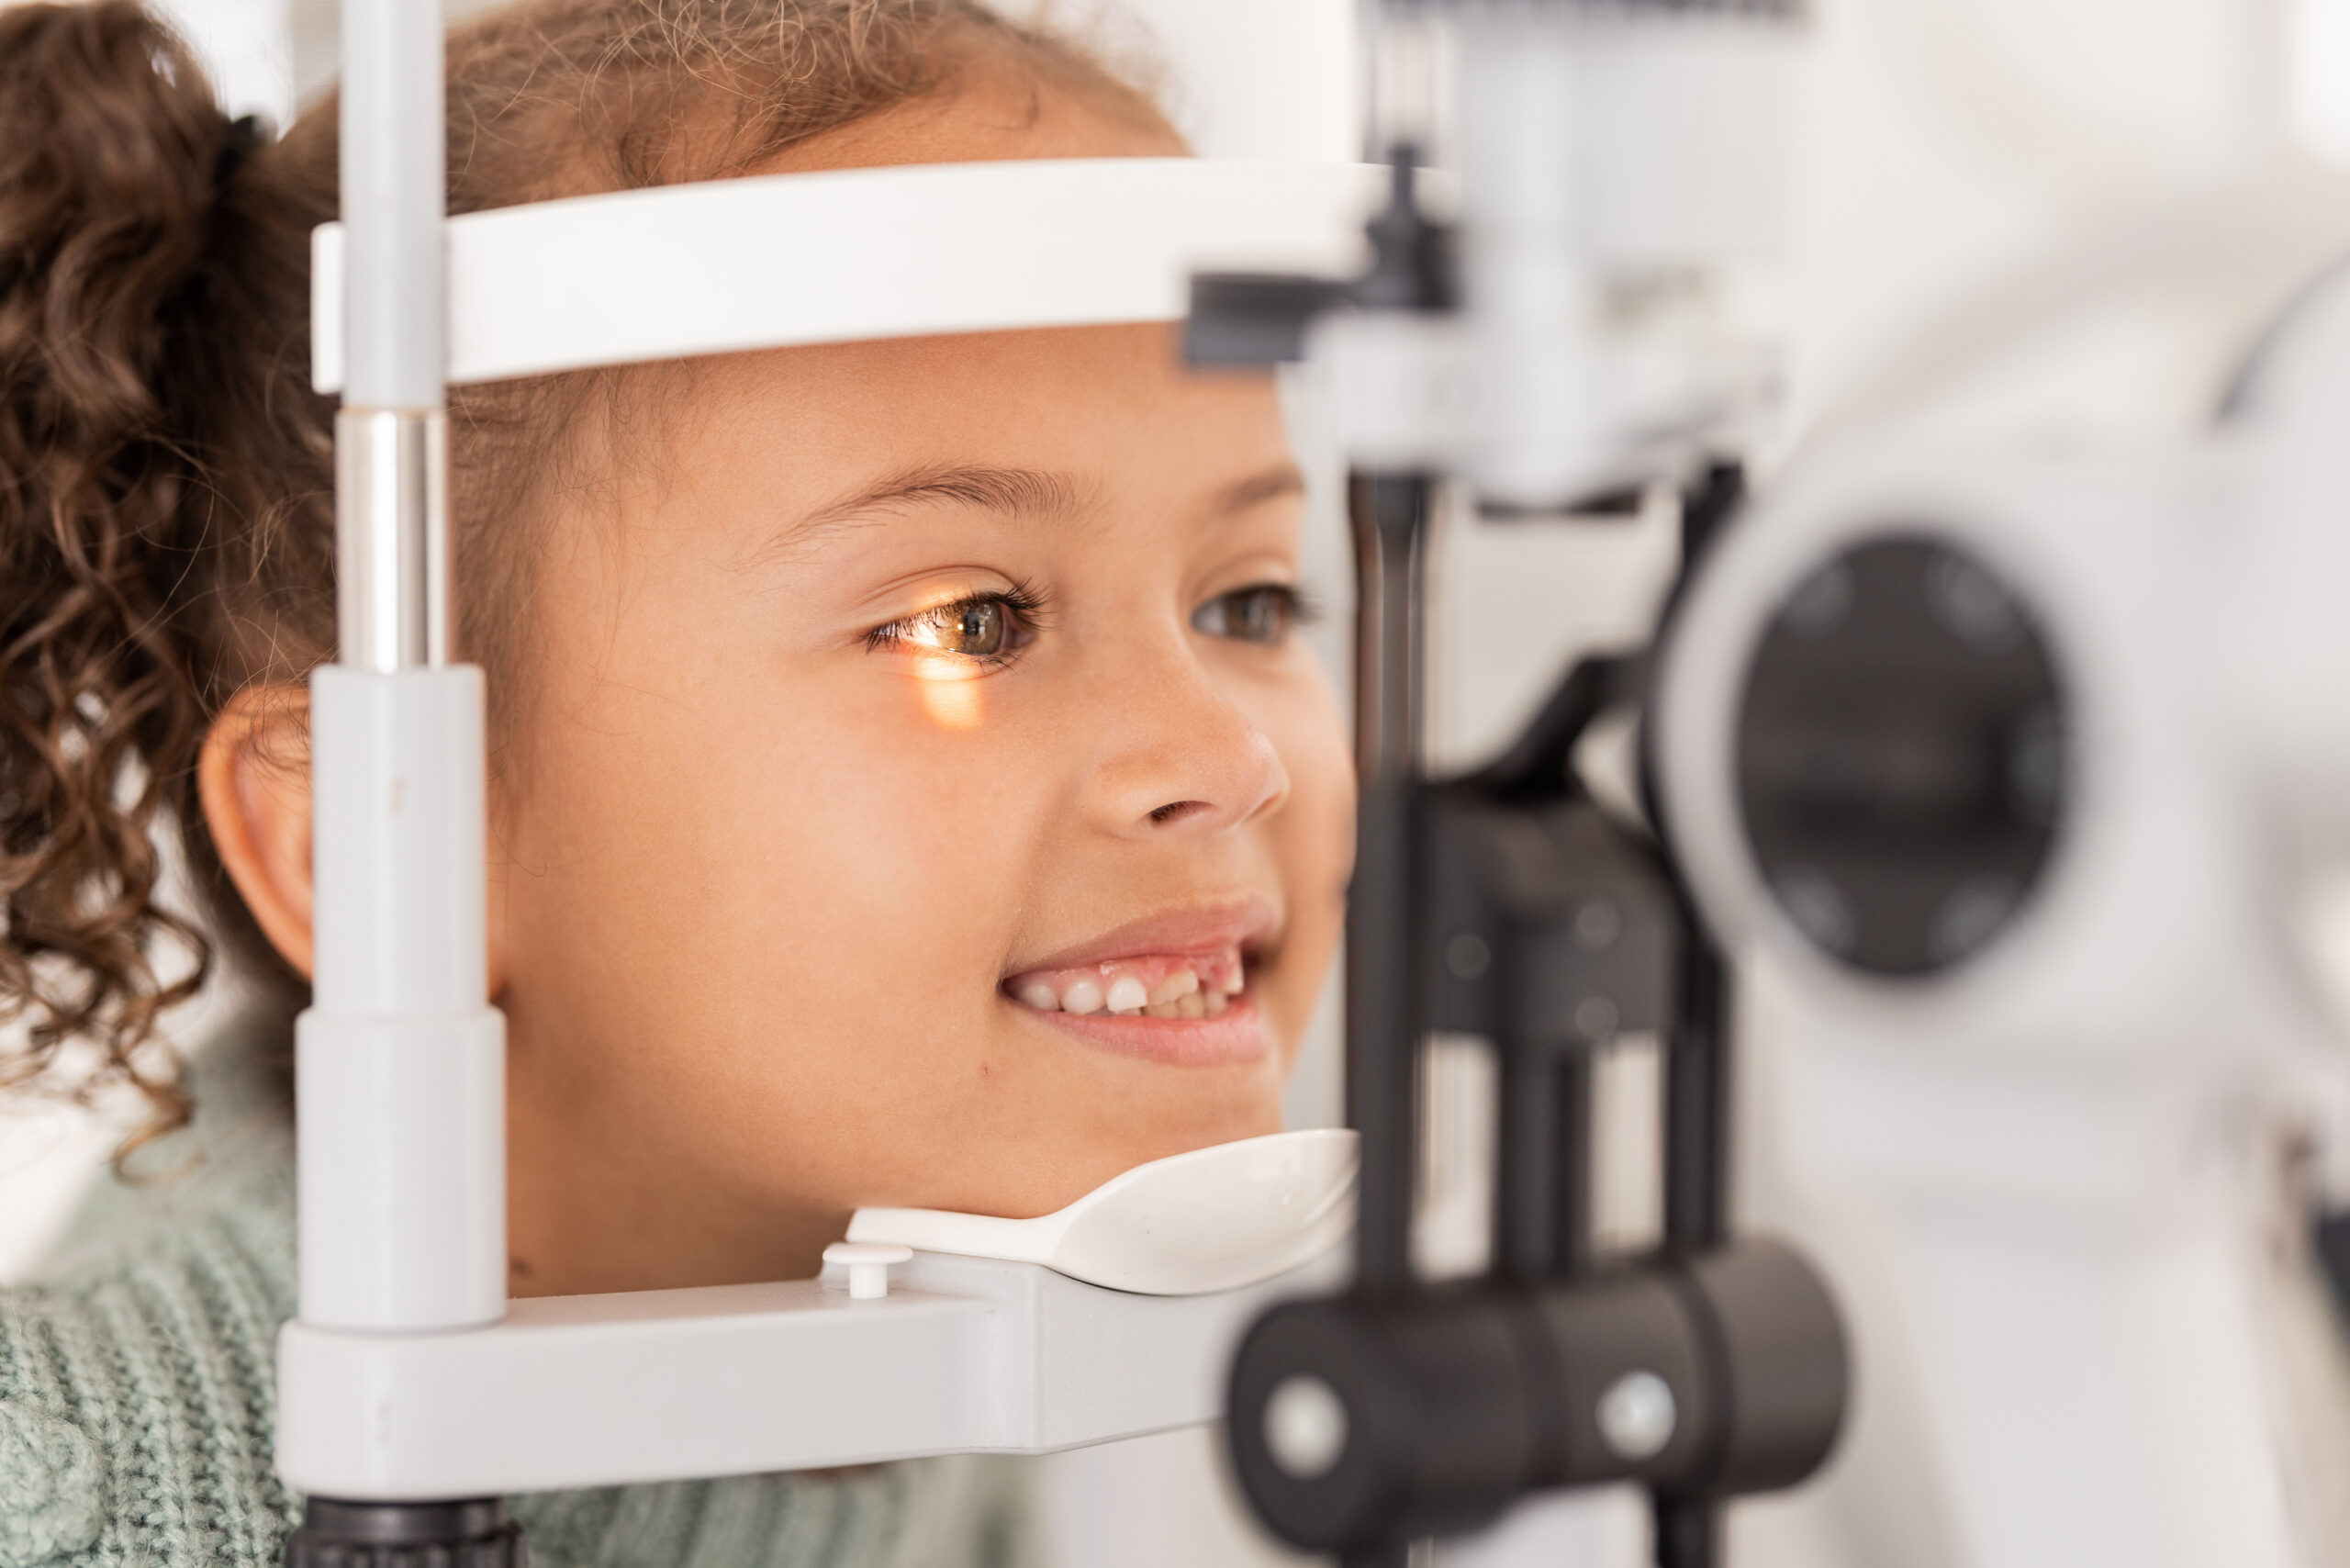 vision-test-and-girl-for-eye-exam-in-the-opthalmologist-office-with-equipment-for-glasses-optics-examination-and-female-child-testing-for-eyecare-health-or-wellness-for-optometry-for-healthcare